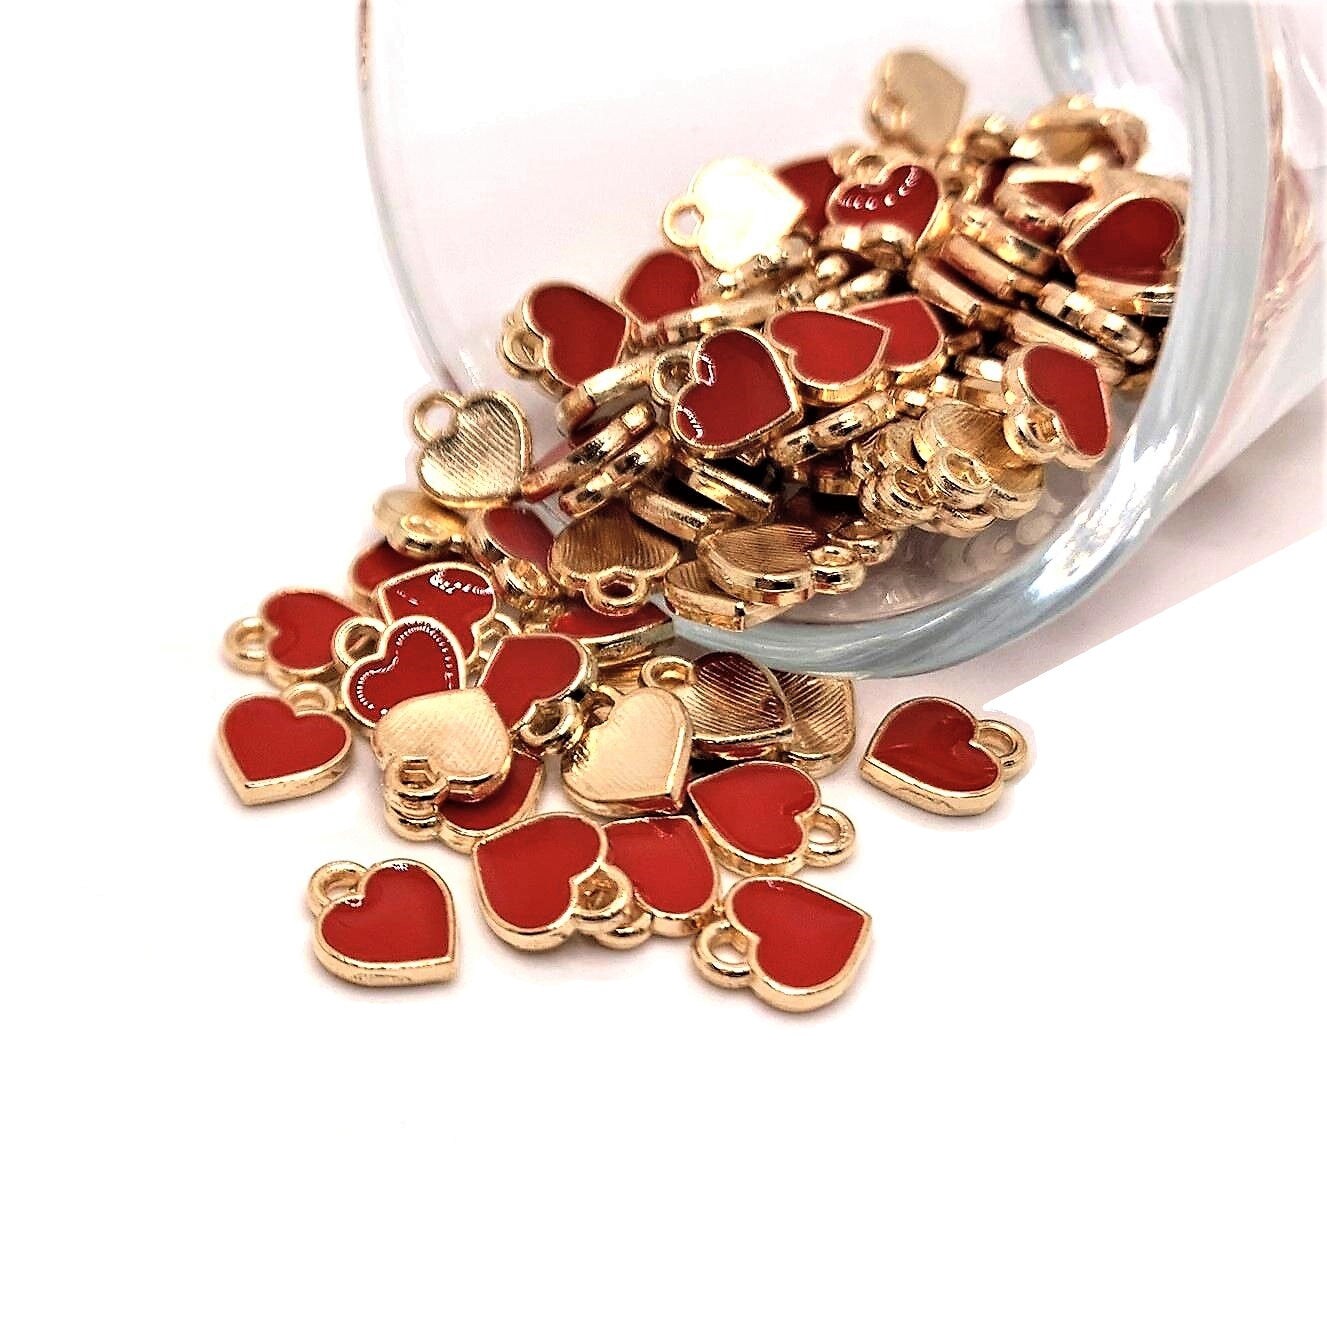 4, 20 or 50 Pieces: Tiny Red and Gold Enamel Heart Charms